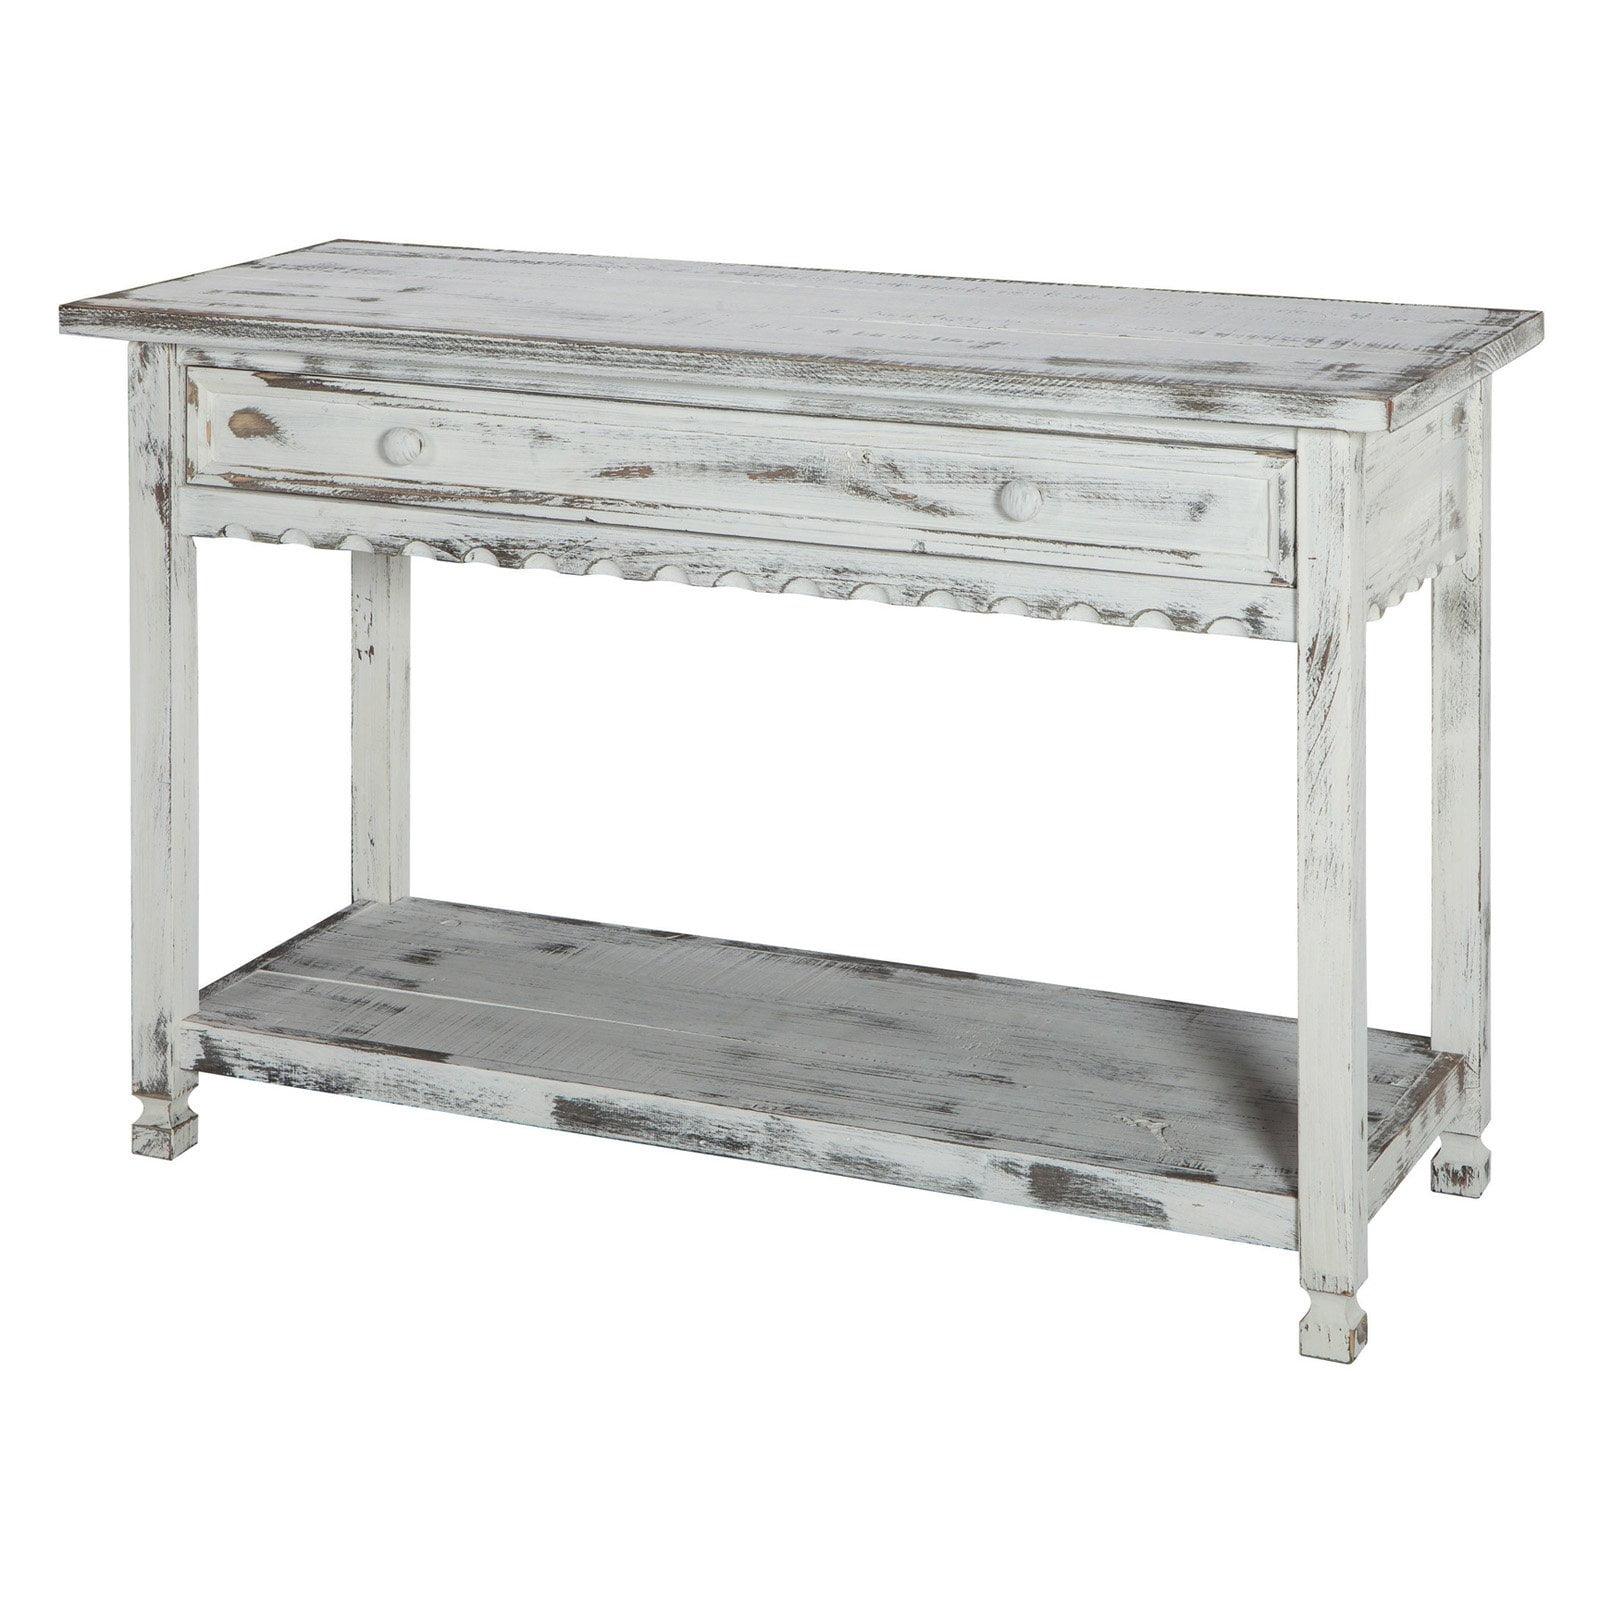 Antique White Cottage-Inspired Media Console with Storage Shelf